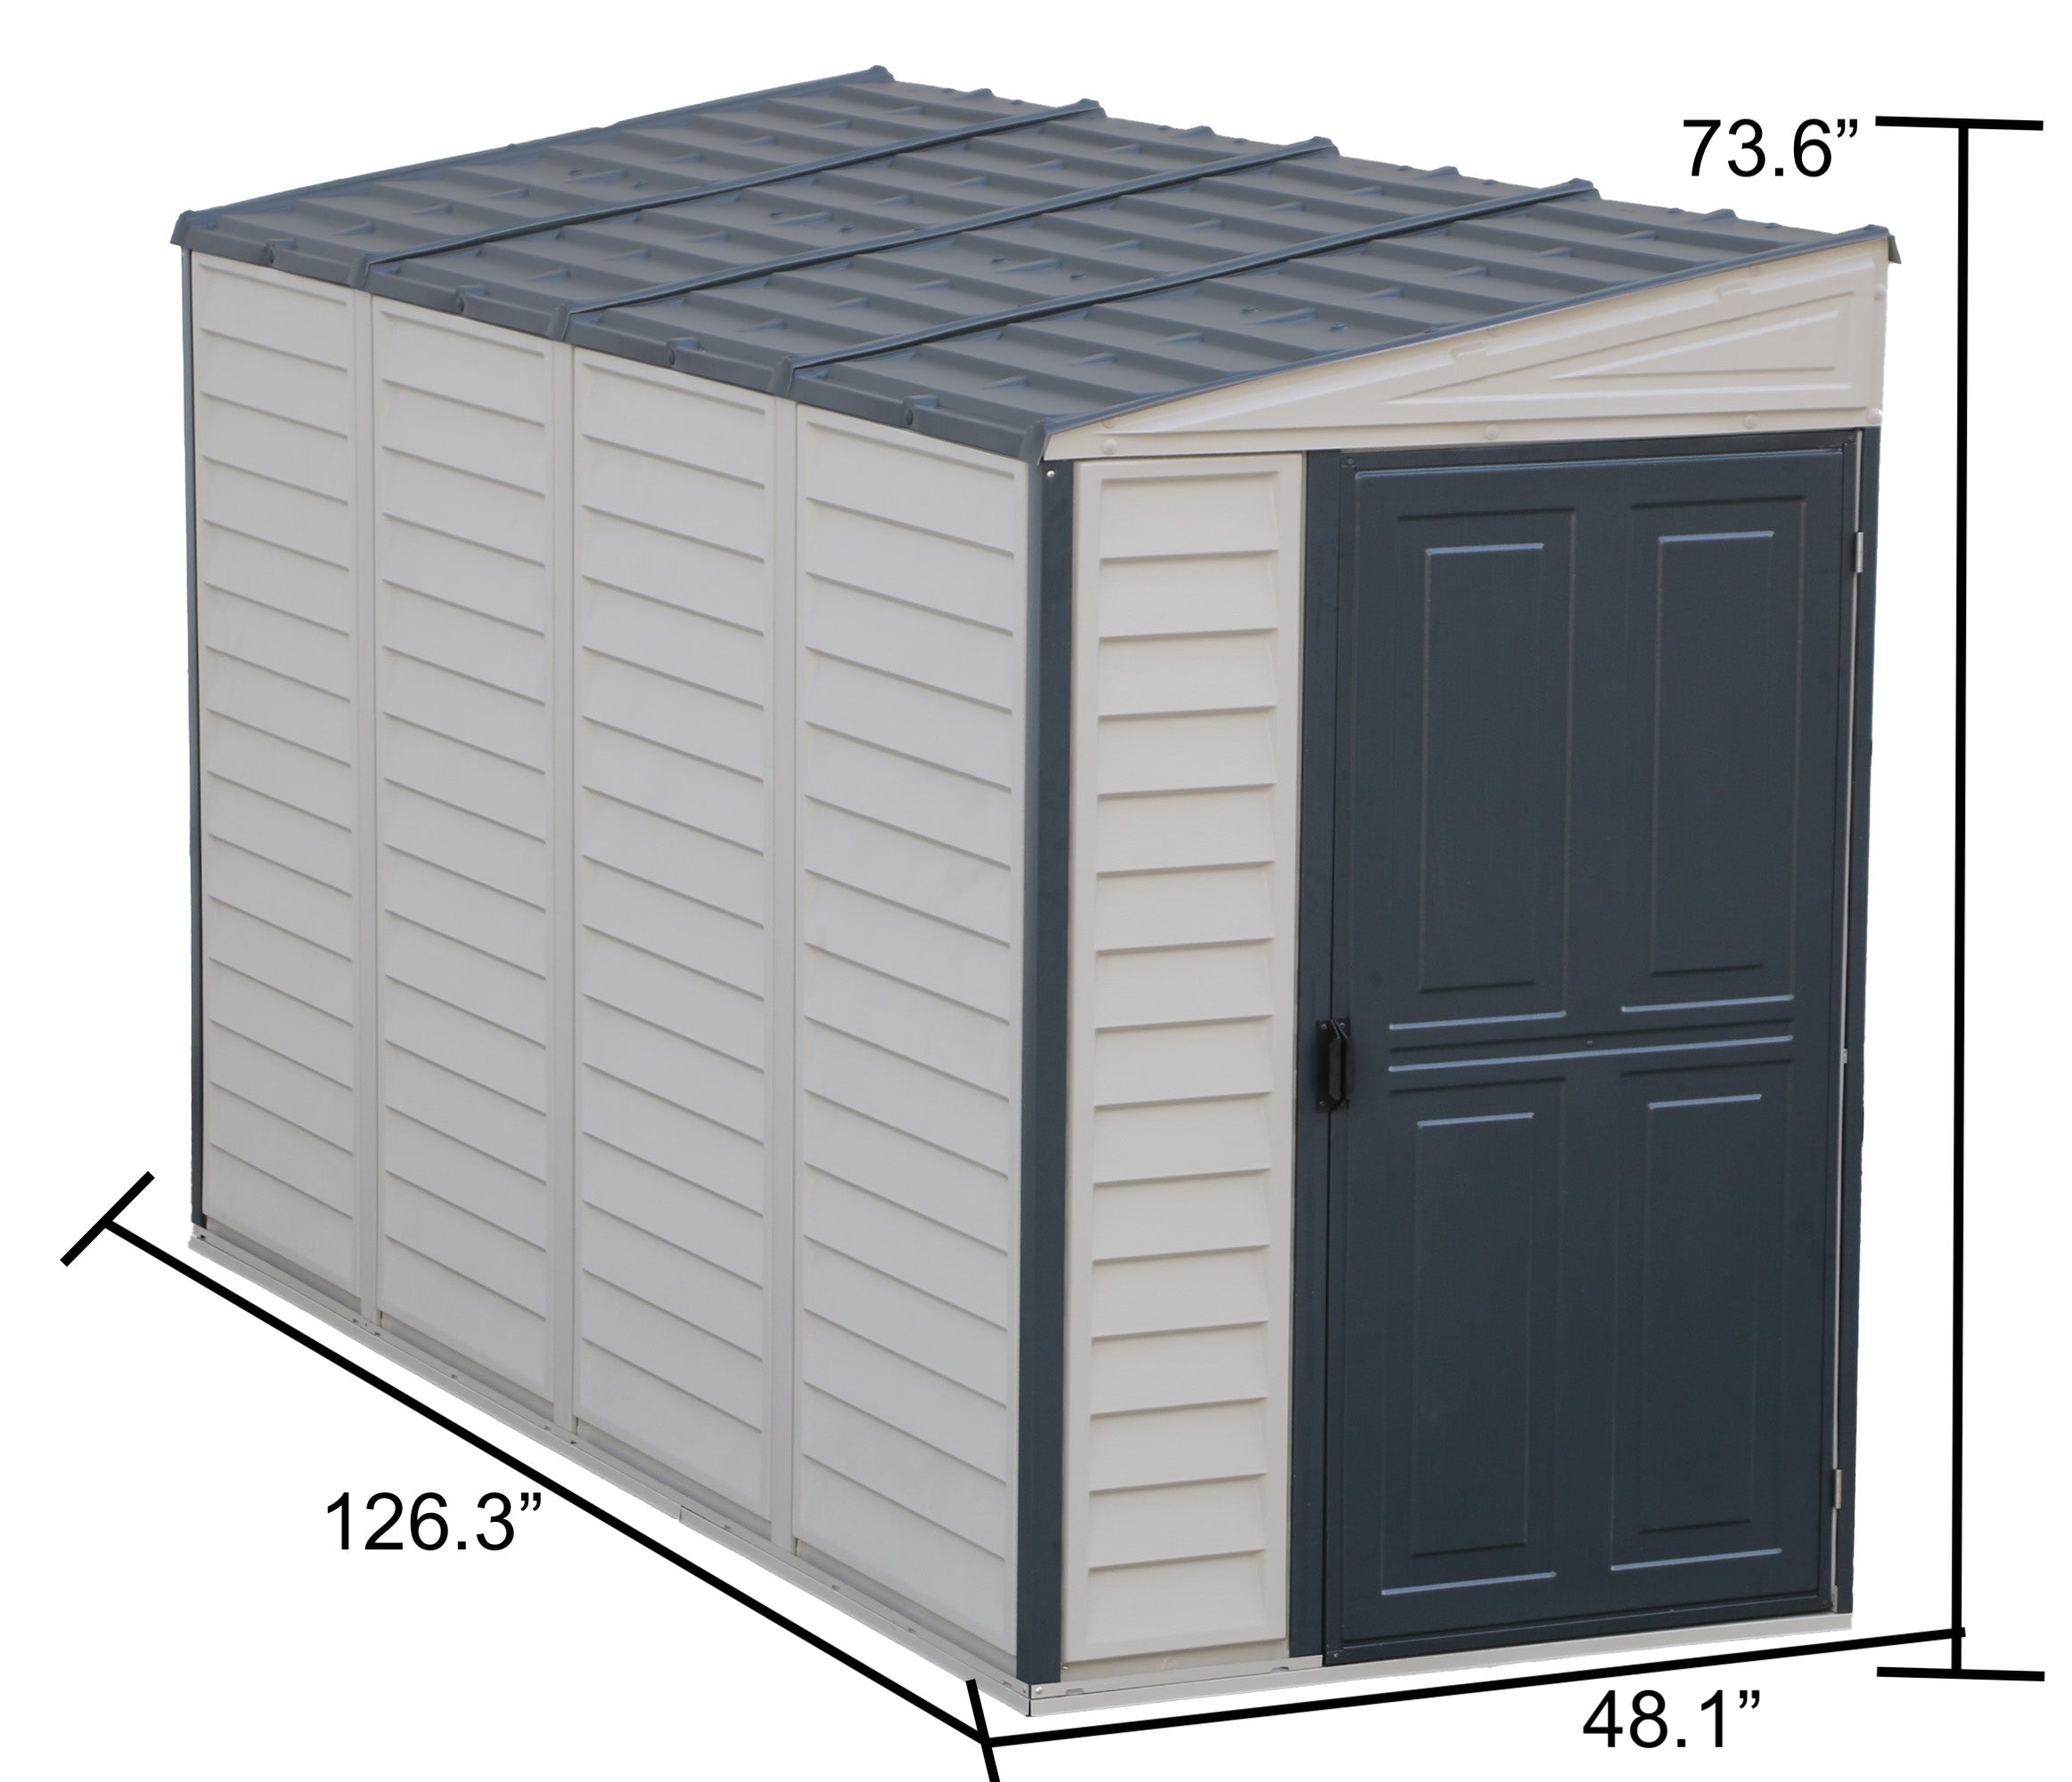 Duramax 4x10 Sidemate Shed w/ Foundation Adobe 36725 angled view from high with dimensions